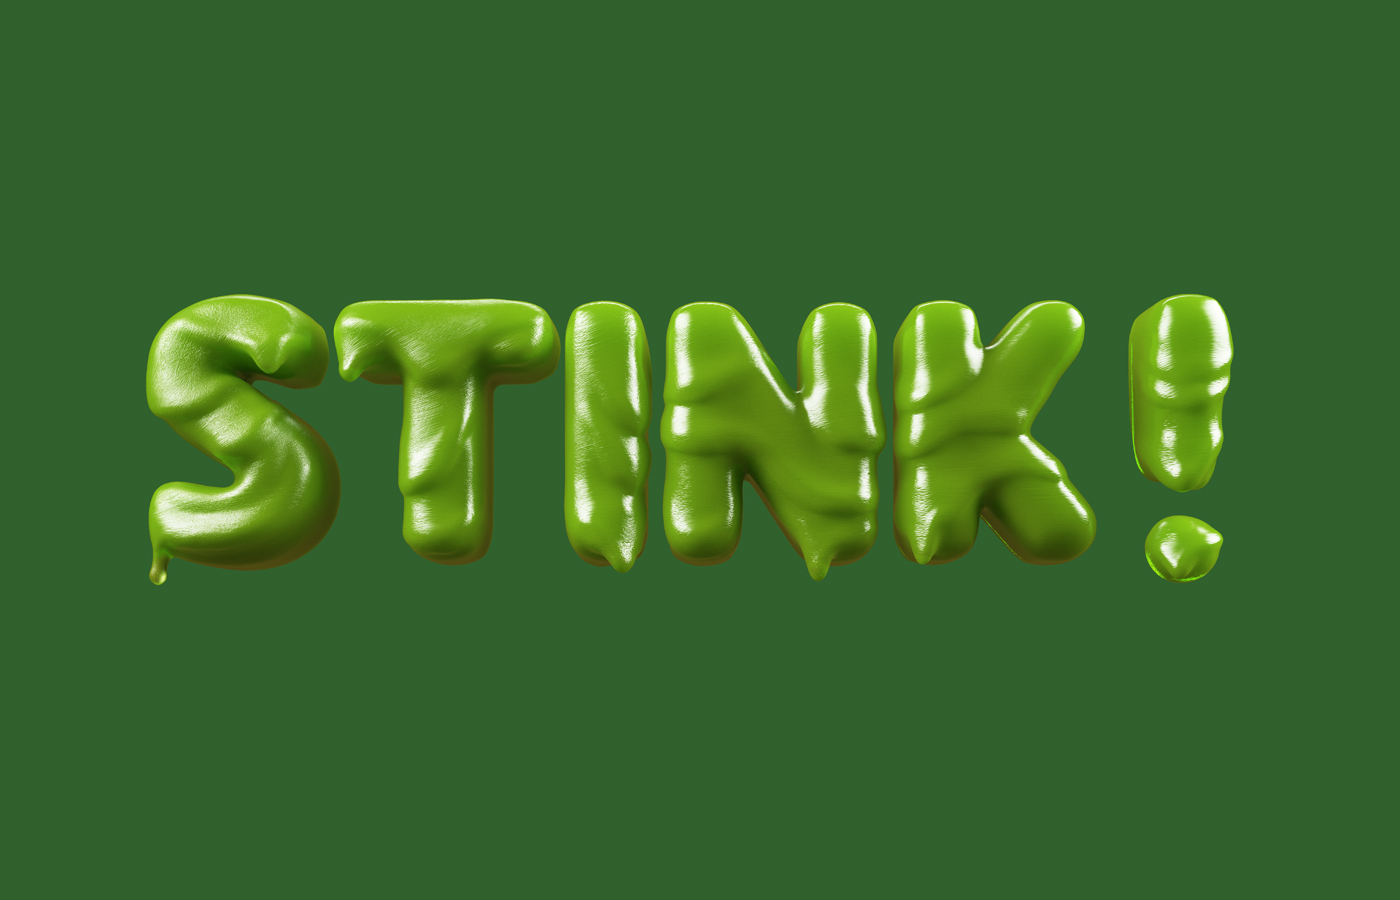 3DLETTERING CESS 3D 3DTYPE LETTERING CGI 3DARTIST LIQUIDTYPE STINK DIRTY